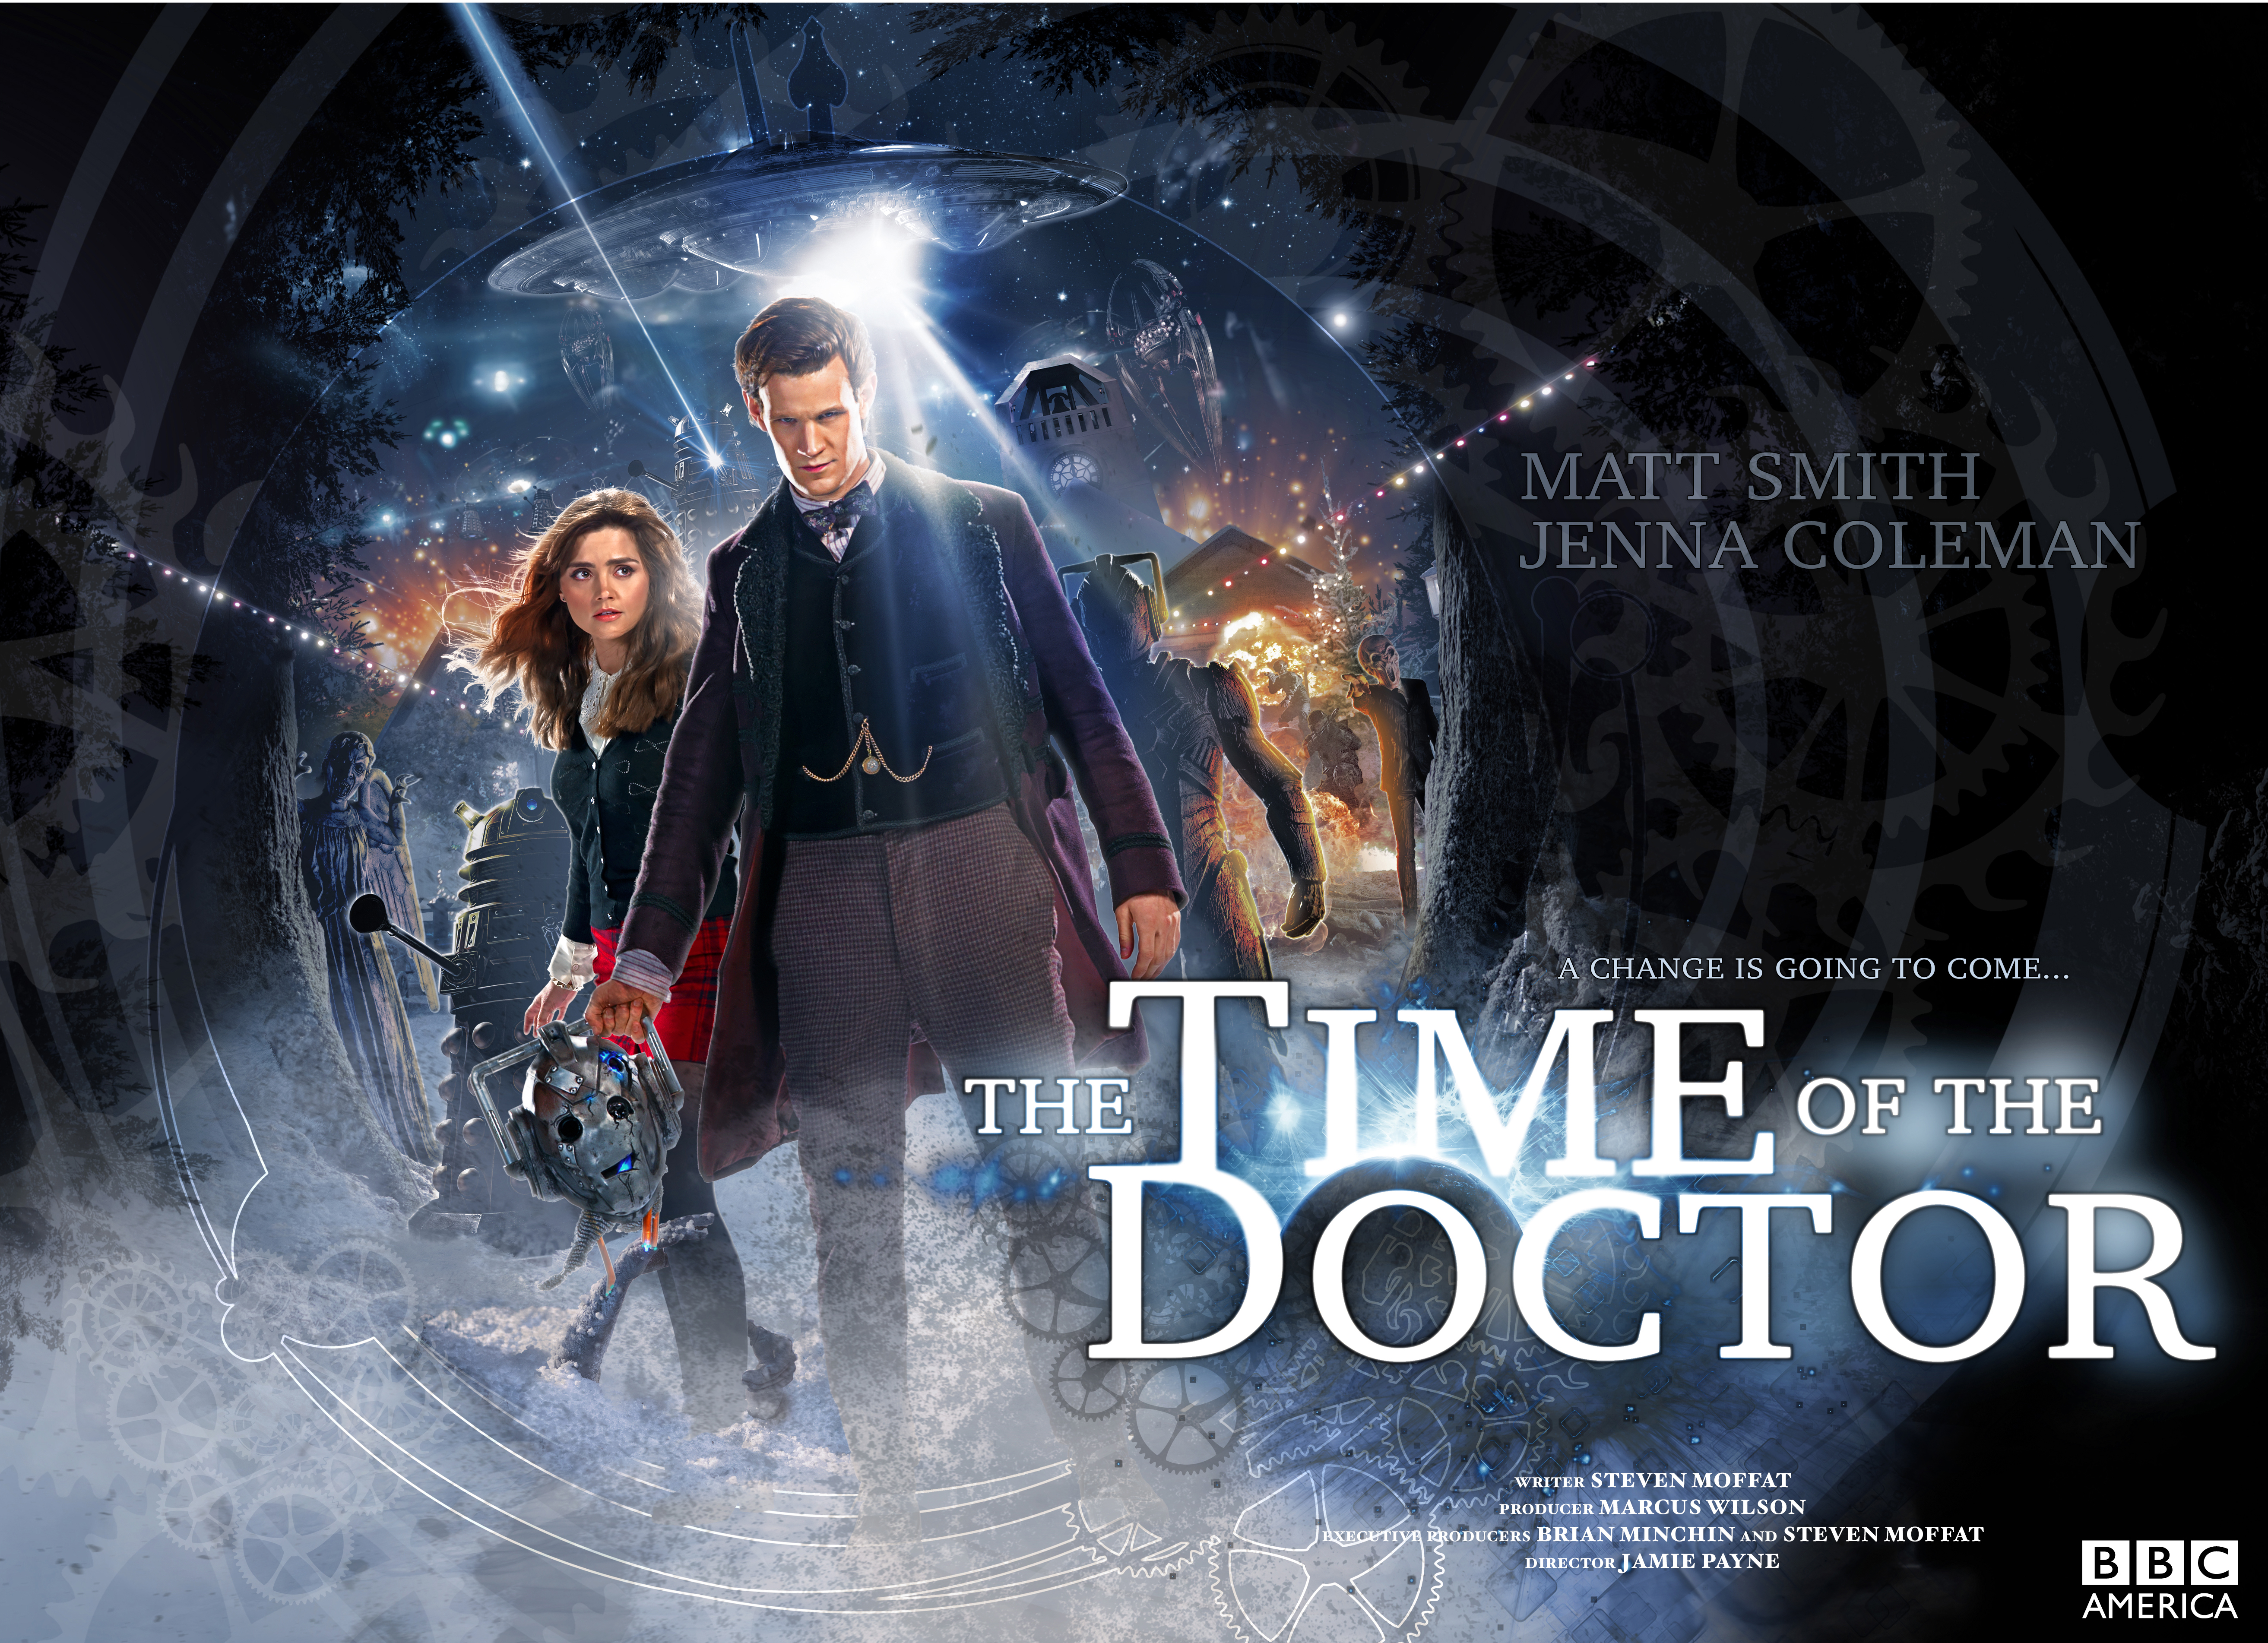 ***STRICTLY EMBARGOED FOR ALL USAGE IN PRINT AND ONLINE UNTIL 00.01 ON 5 DECEMBER, 2013, GMT***DOCTOR WHO XMAS 2013